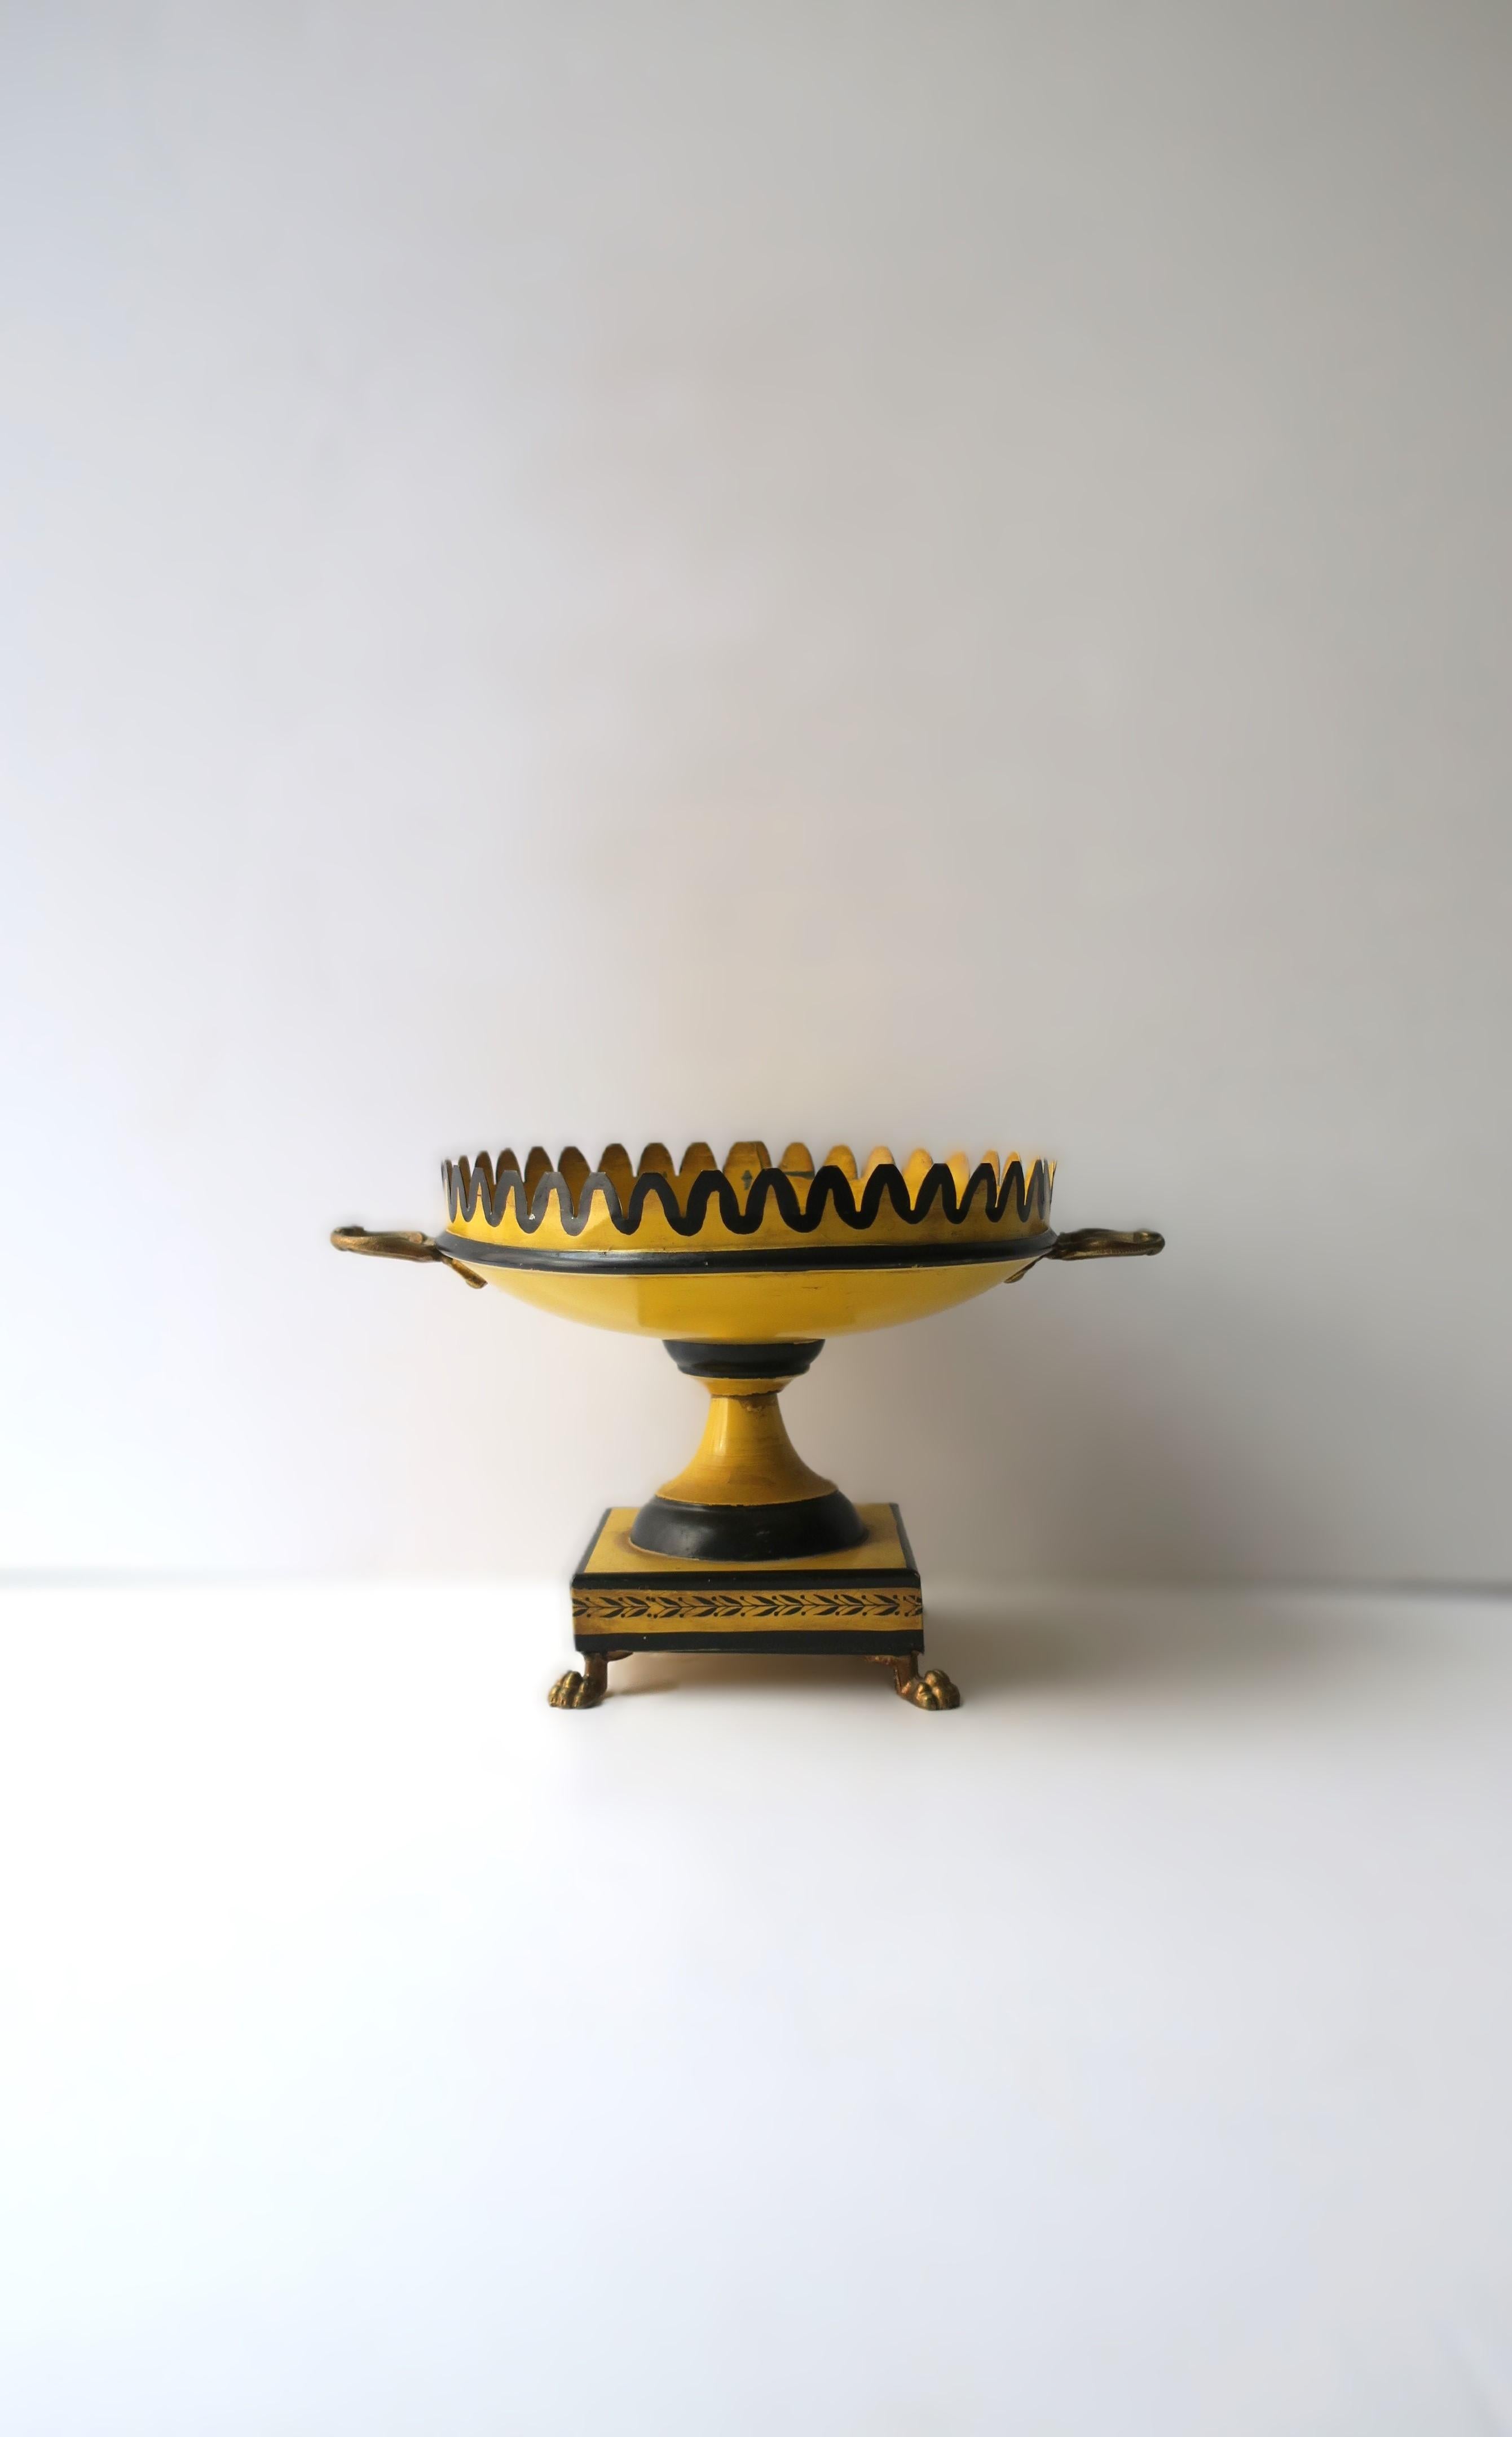 A beautiful Italian tôle footed compote tazza with scalloped edge and lion paw feet, in the Regency Style, circa early to mid-20th century, Italy. Piece is a rich yellow with black detail (scalloped edge, Regency scene center, decorative base),